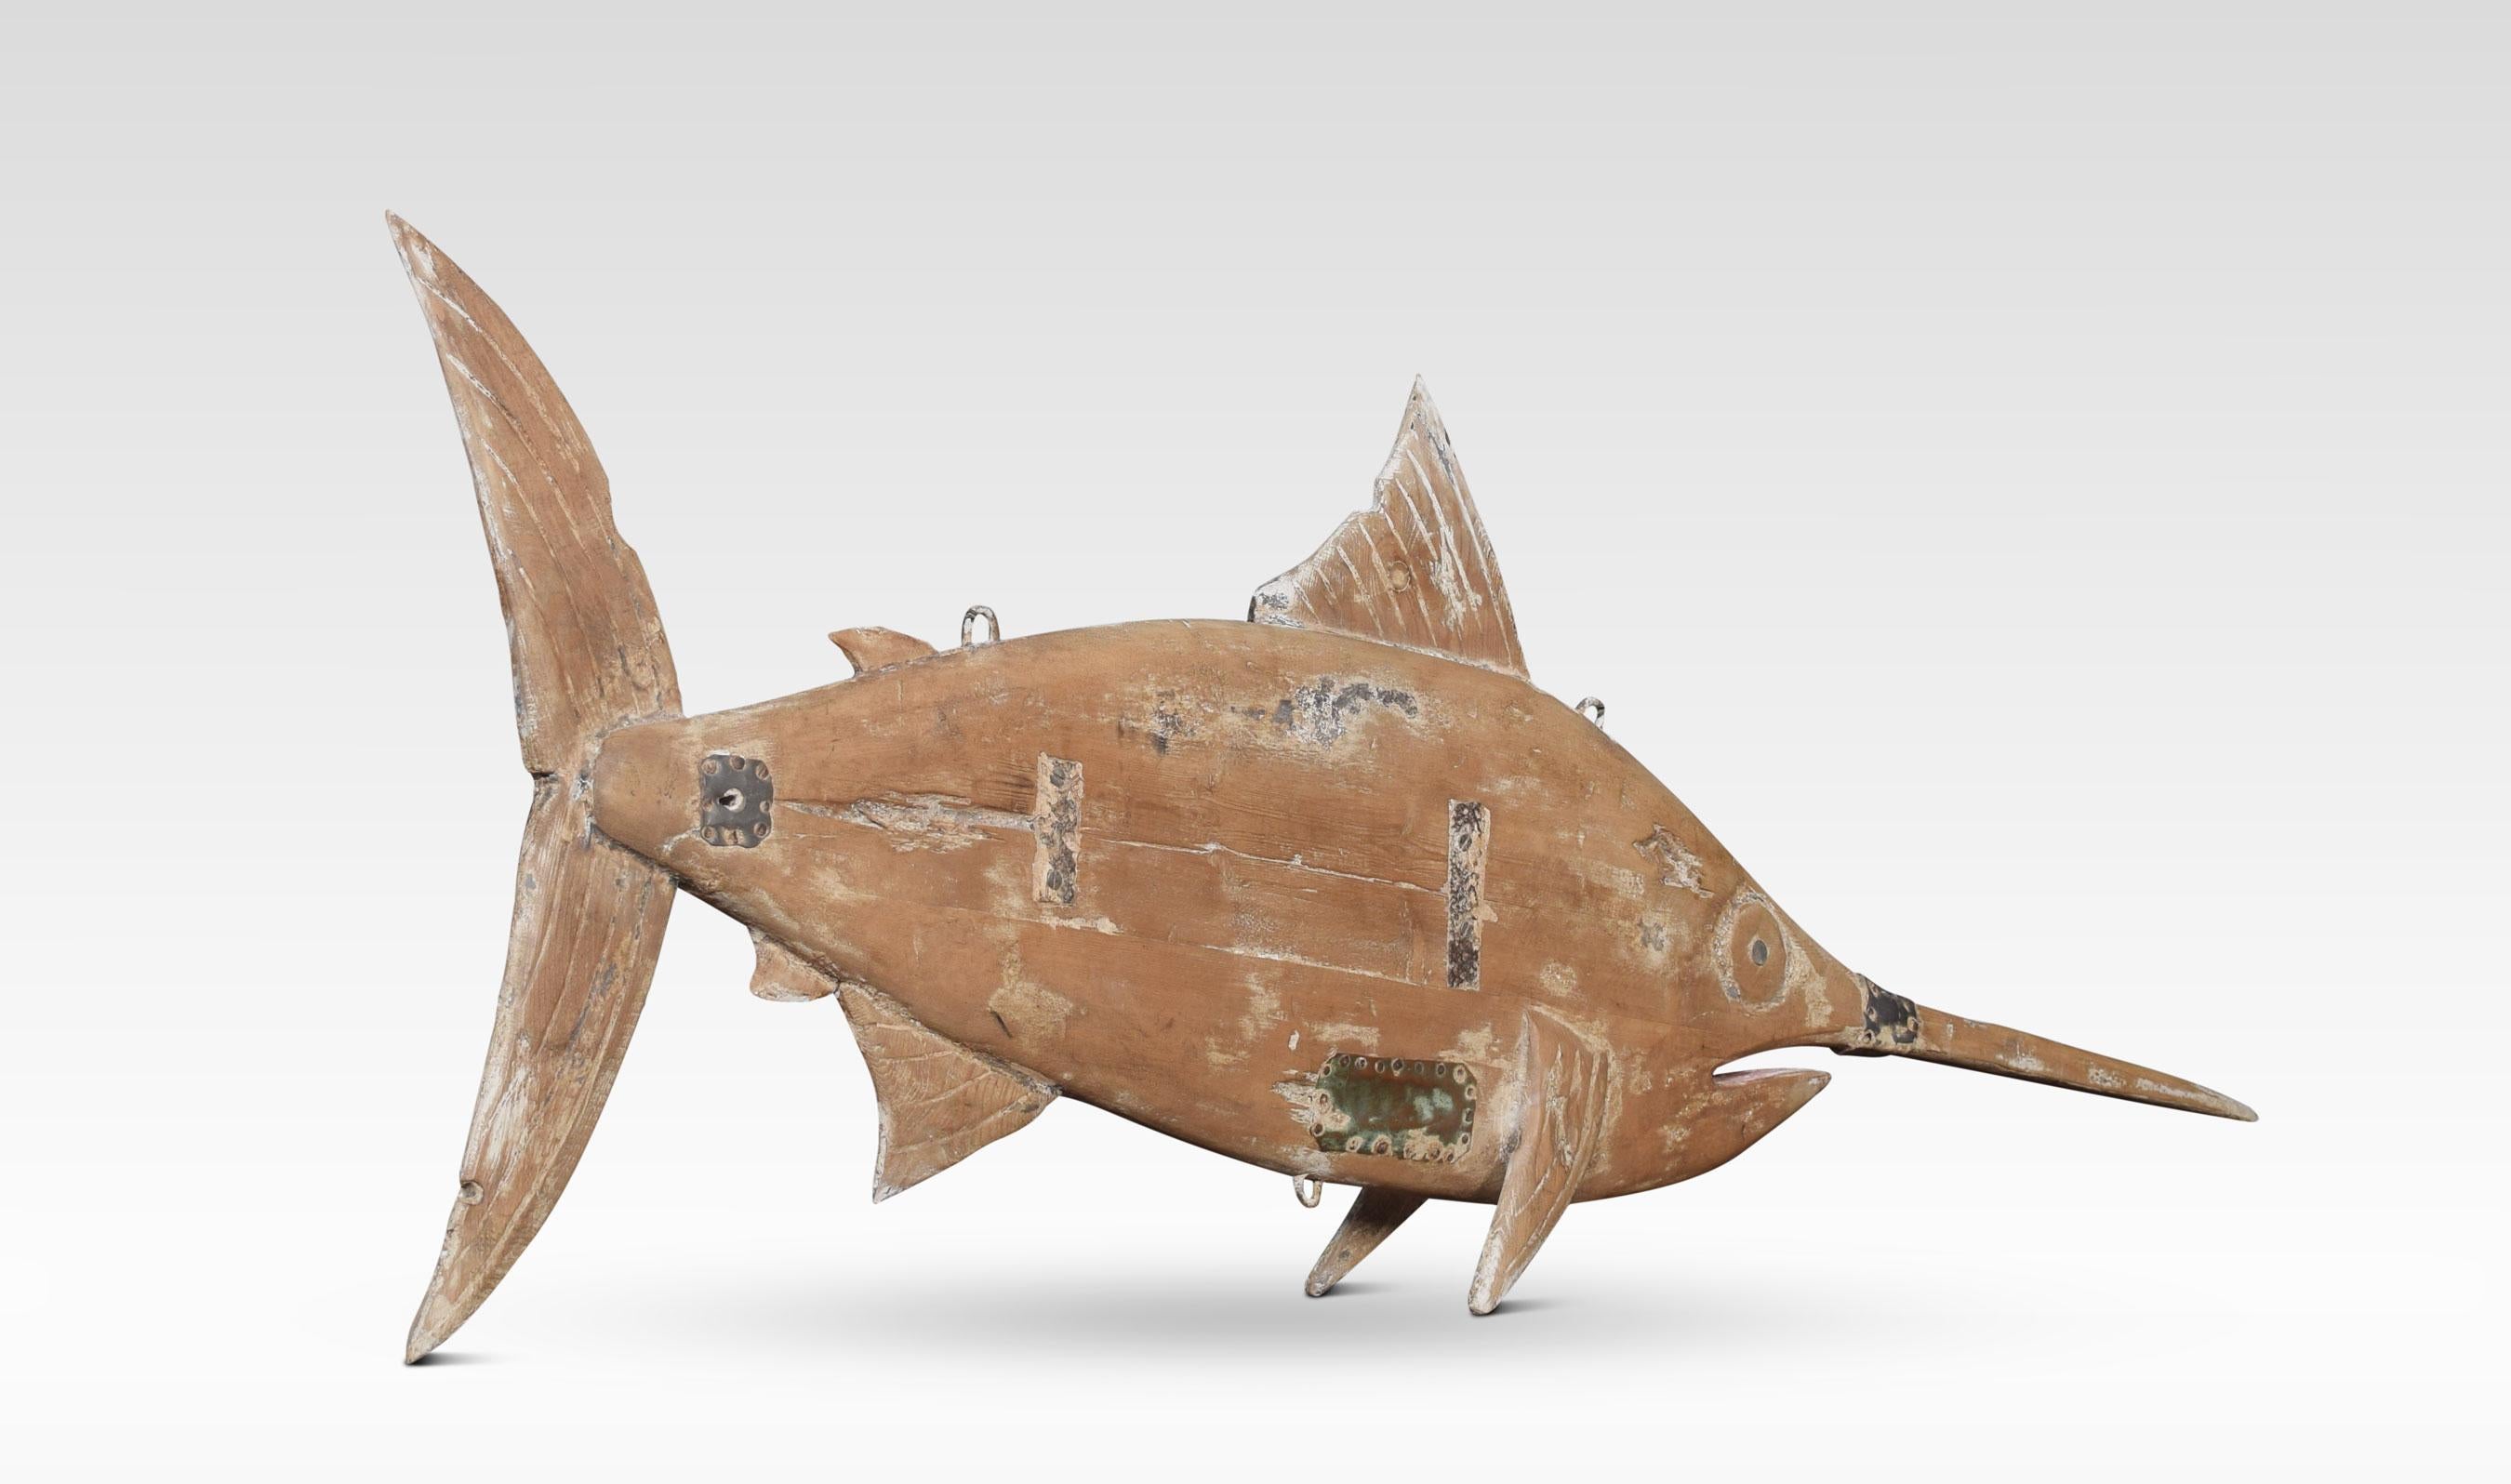 Carved model of a Marlin.
Dimensions:
Height 20 inches
Width 56 inches
Depth 5.5 inches.